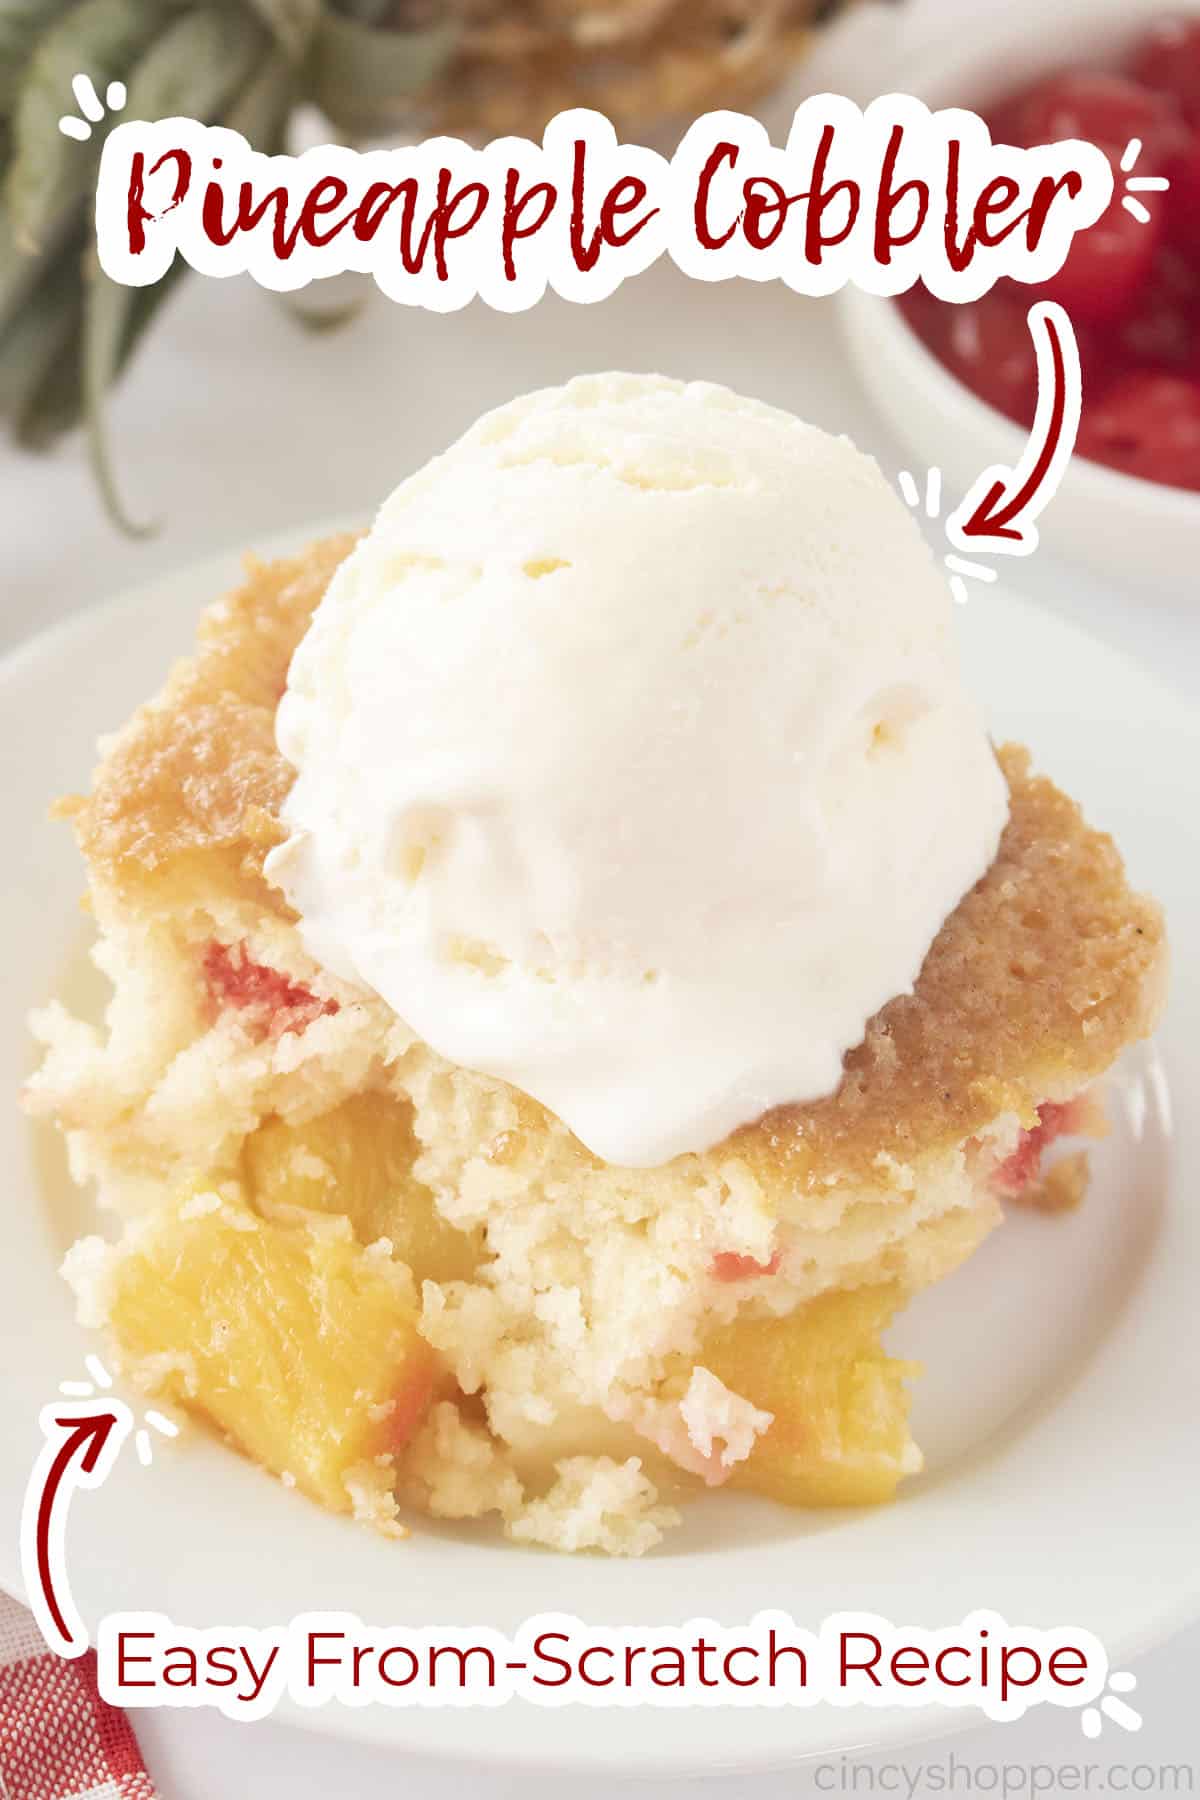 Text on image Pineapple Cobbler. Easy from scratch recipe.